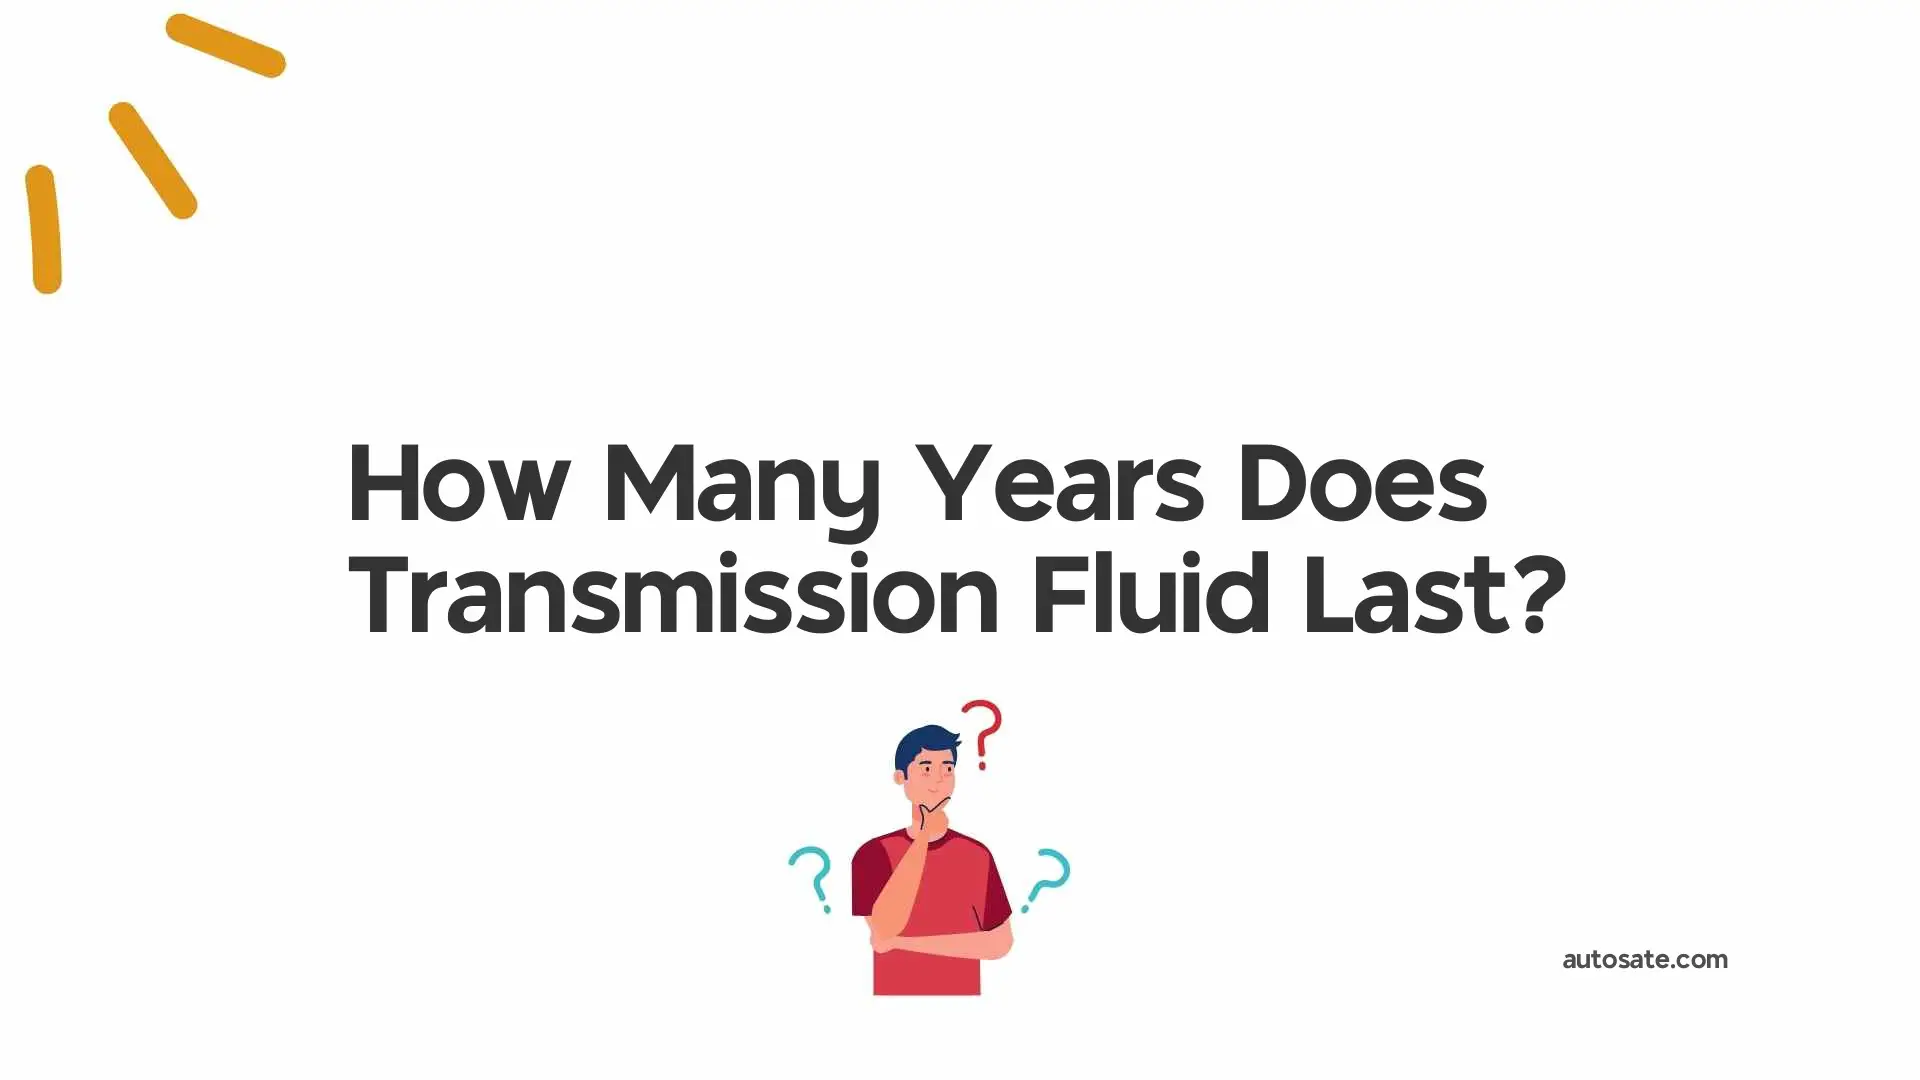 How Many Years Does Transmission Fluid Last?